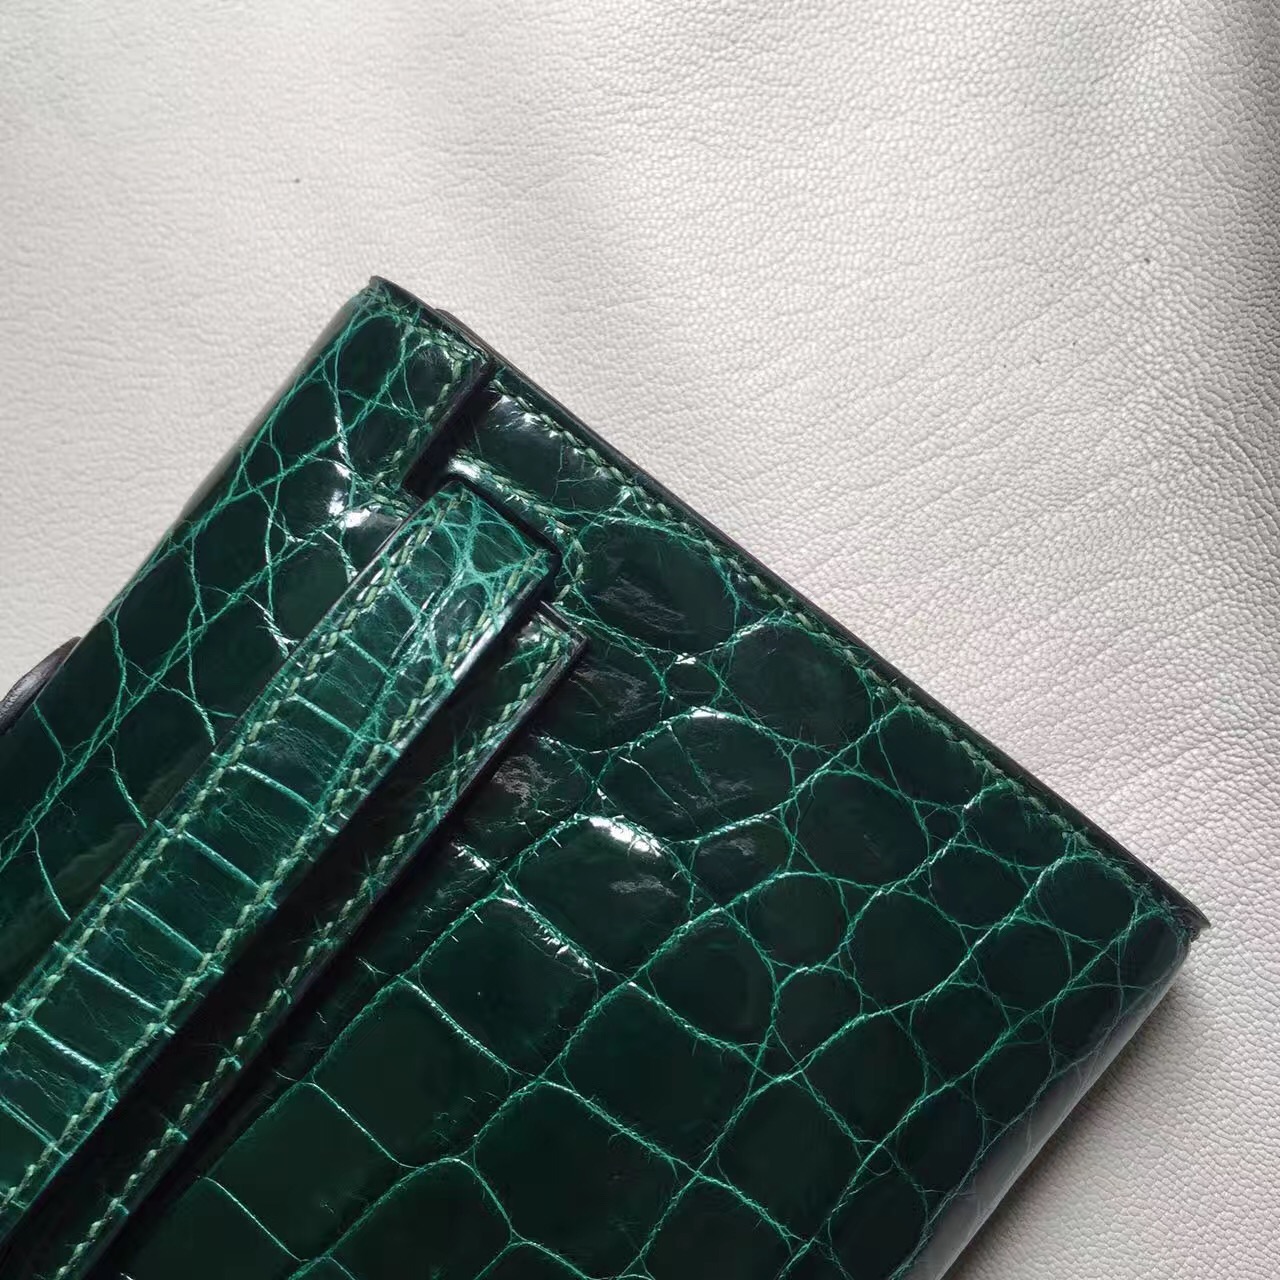 New Noble Hermes Kelly Cut Clutch Bag in CK67 Vert Fonce Crocodile Shiny Leather